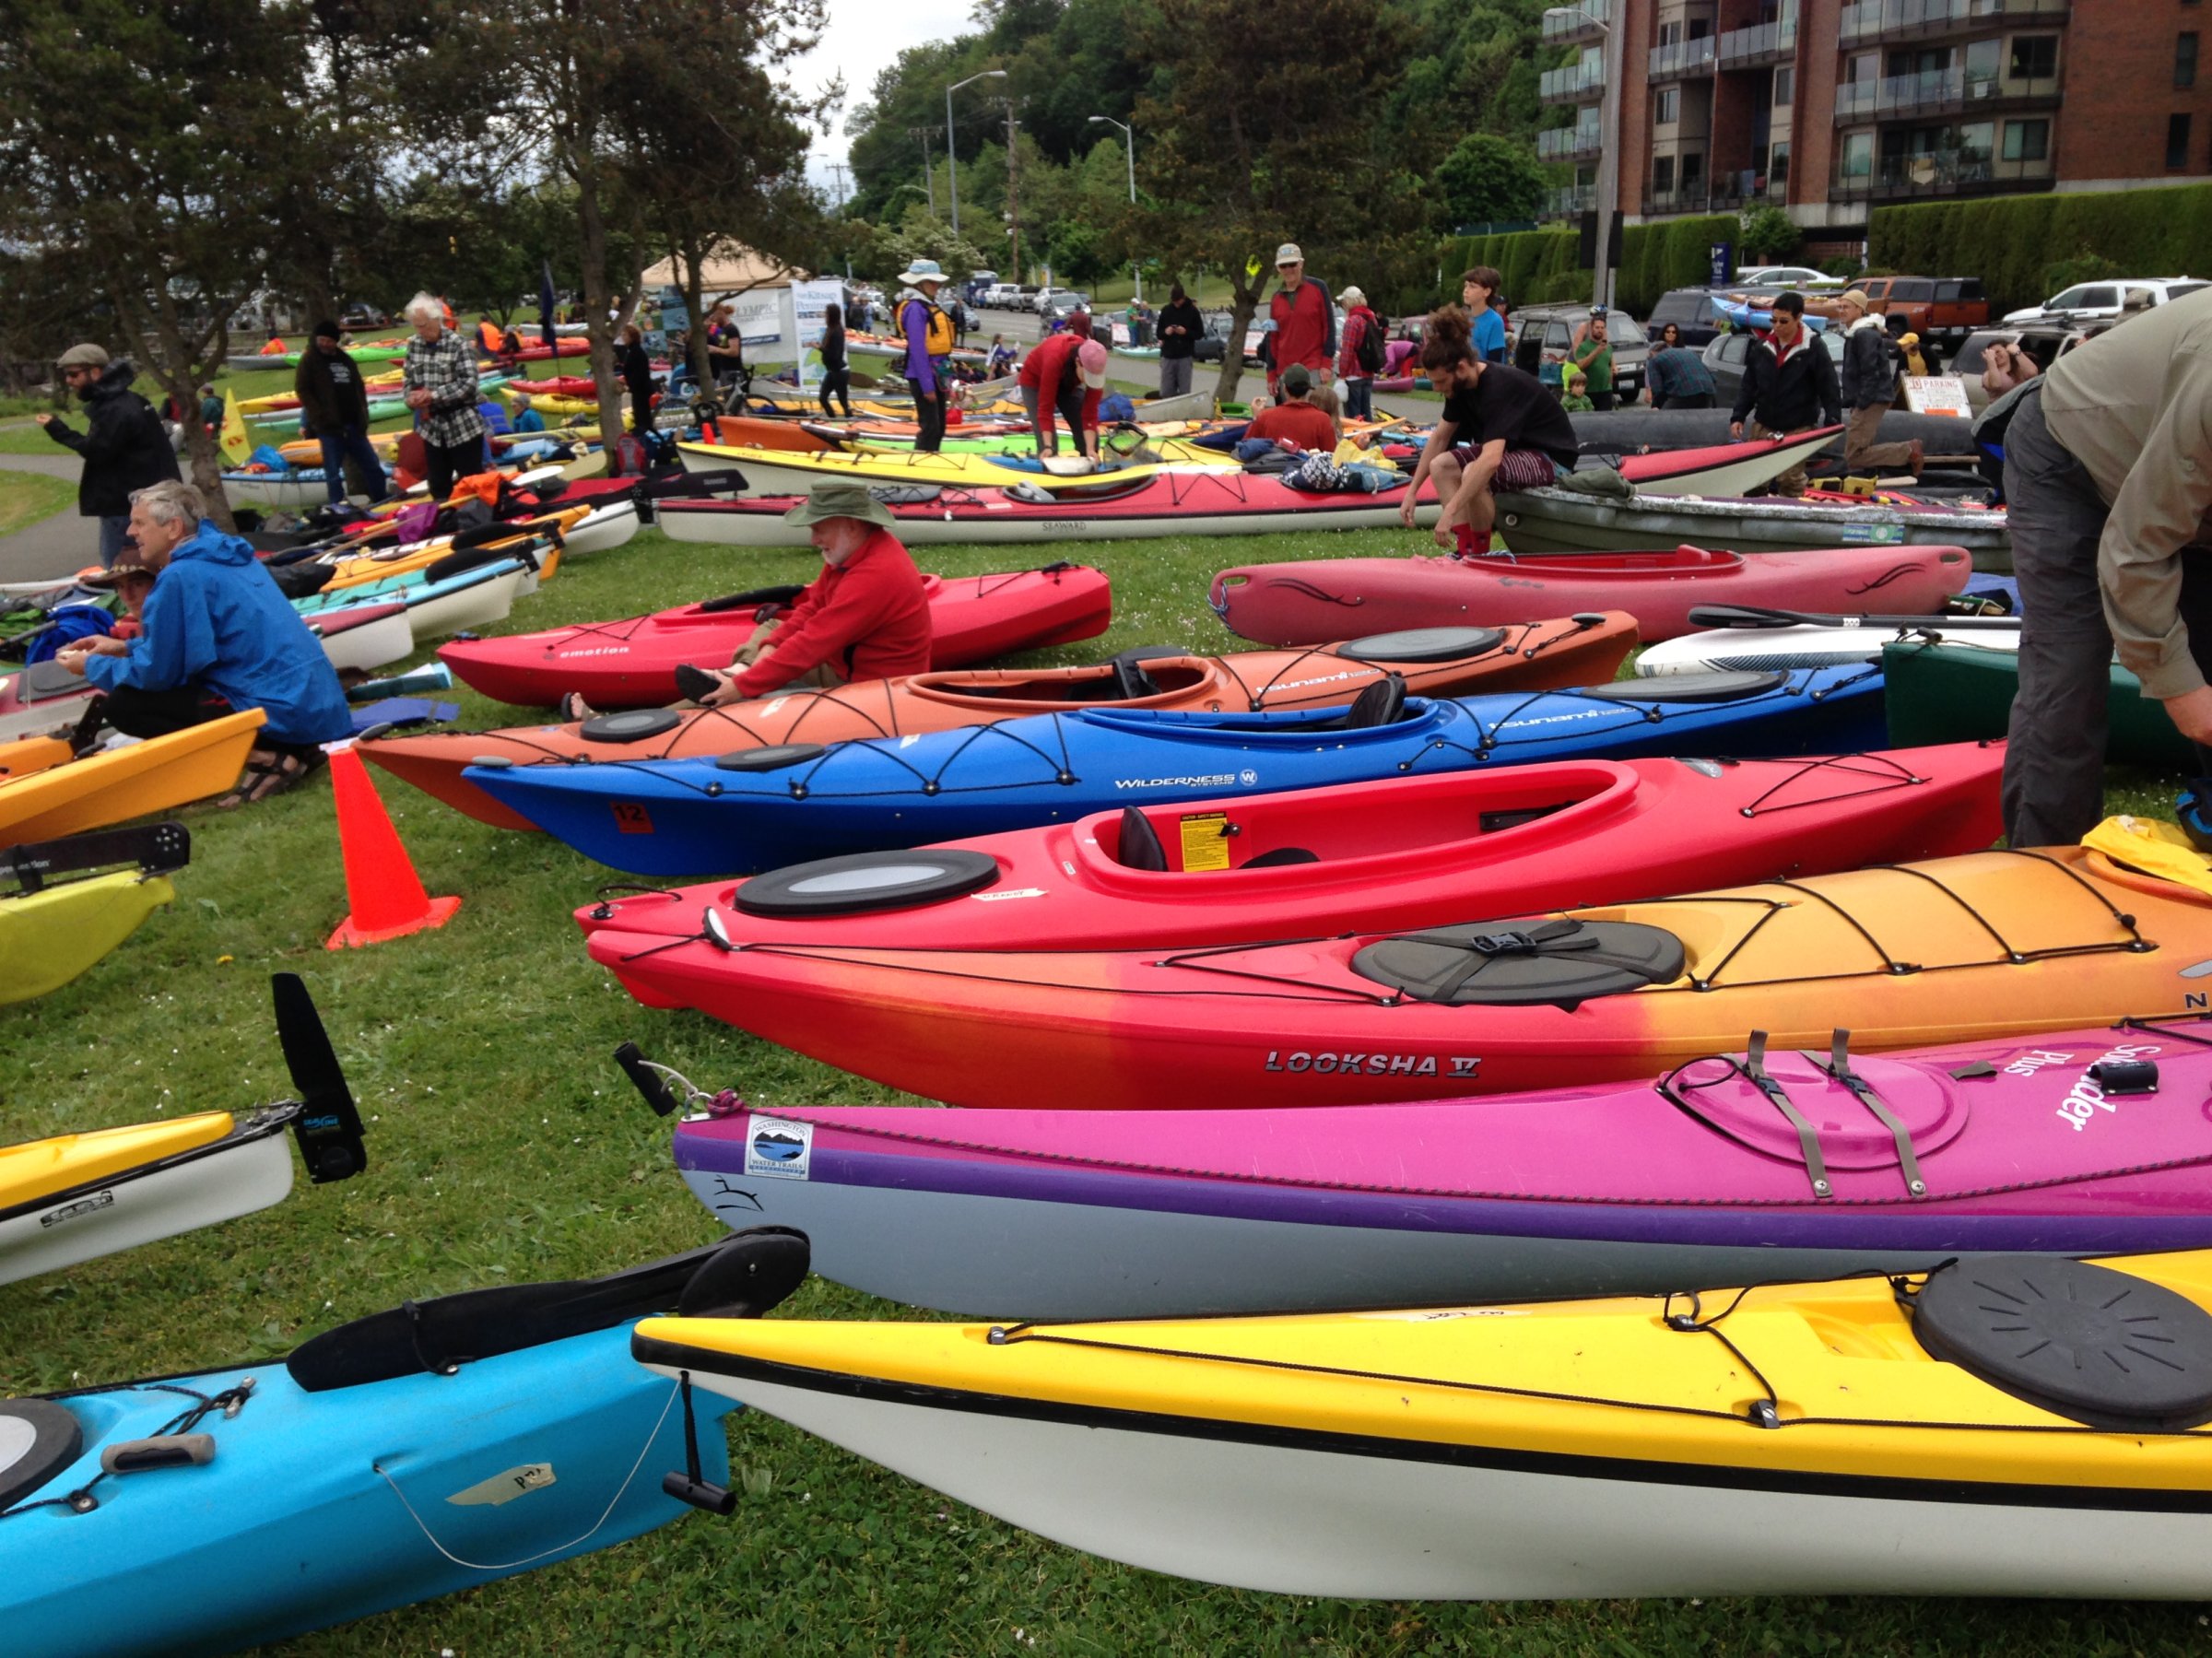 Activists who oppose Royal Dutch Shell's plans to drill for oil in the Arctic Ocean prepare their kayaks for the "Paddle in Seattle" protest on May 16, 2015, in Seattle.